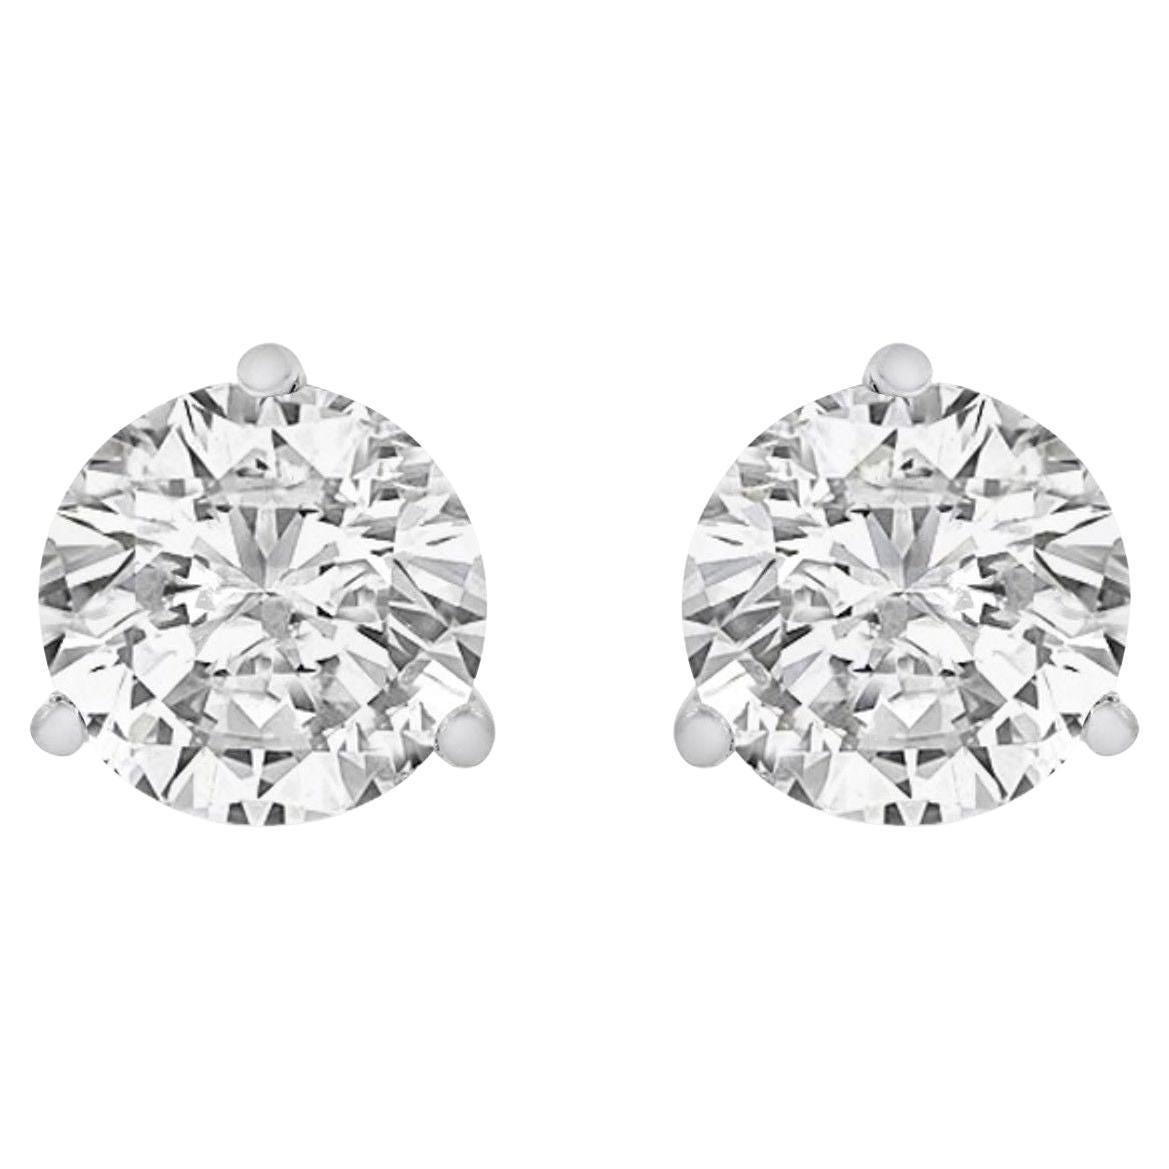 Exquisite 2.00 Carats VS1 Moissanite 14K Solid White Gold Martini Stud Earrings For Sale